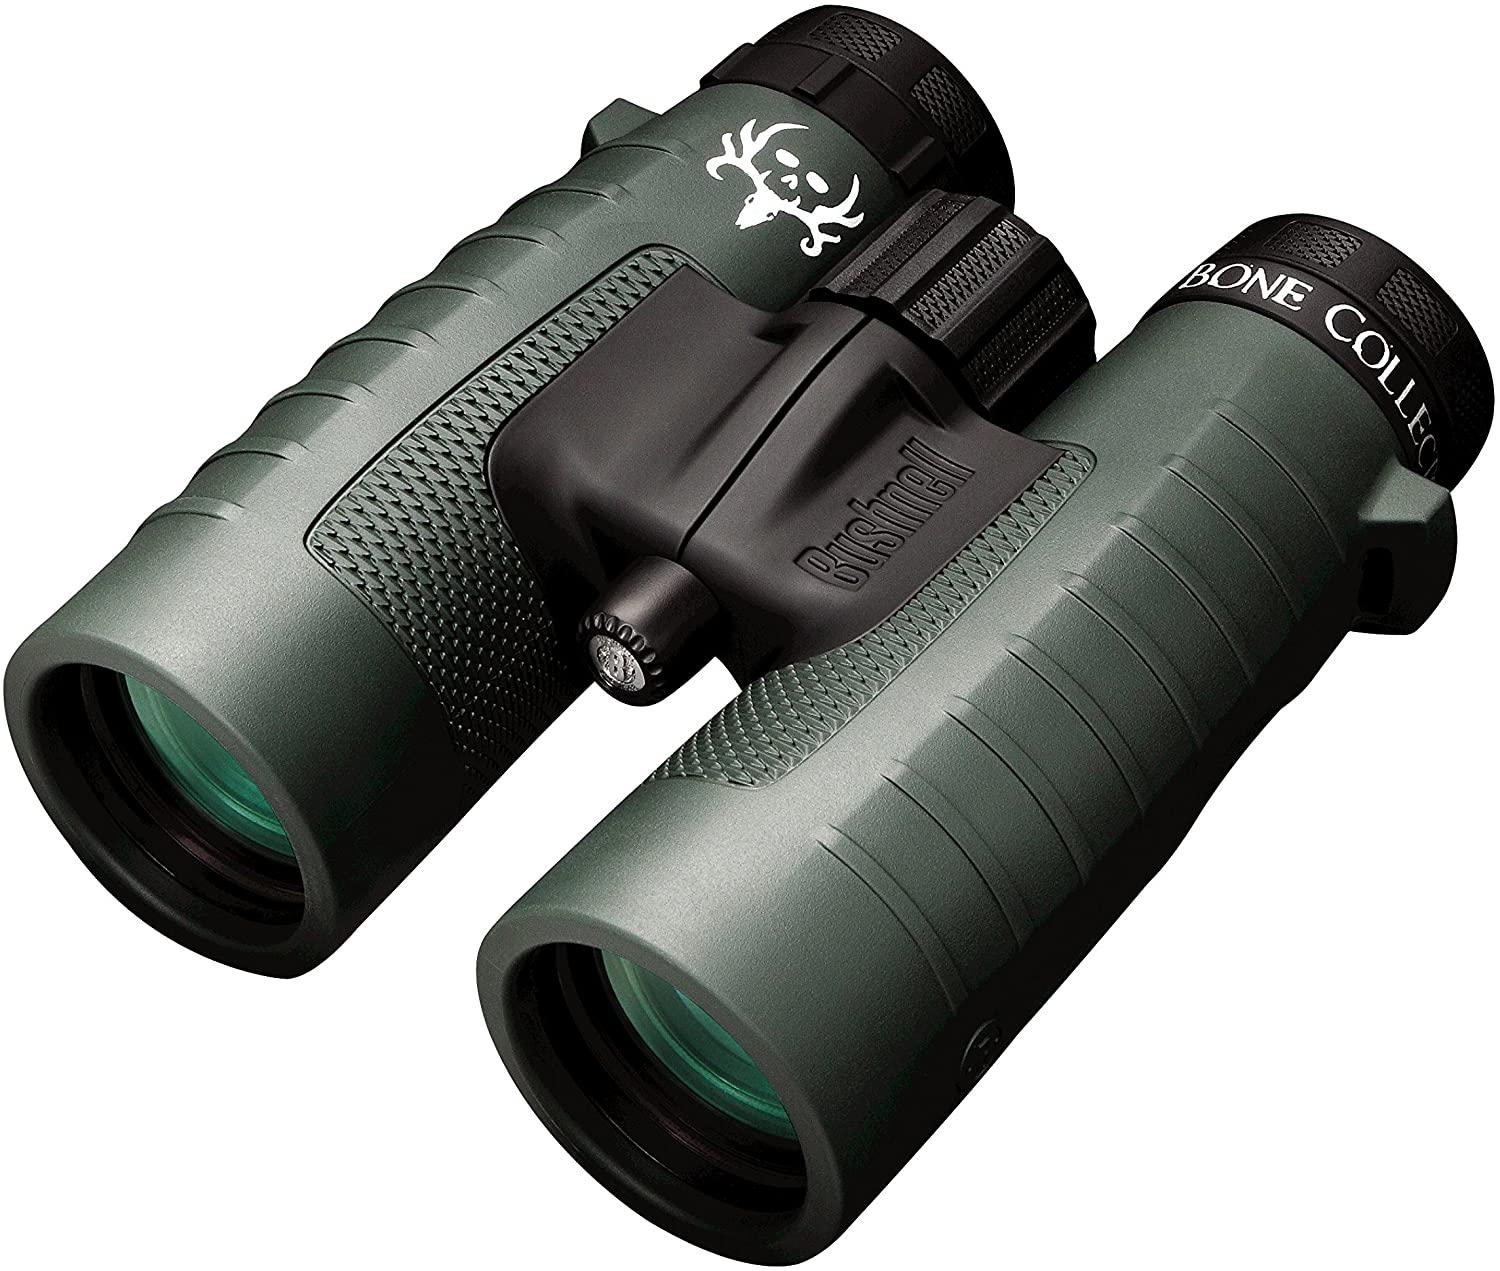 Bushnell Trophy Roof Binocular for $75.26 Shipped